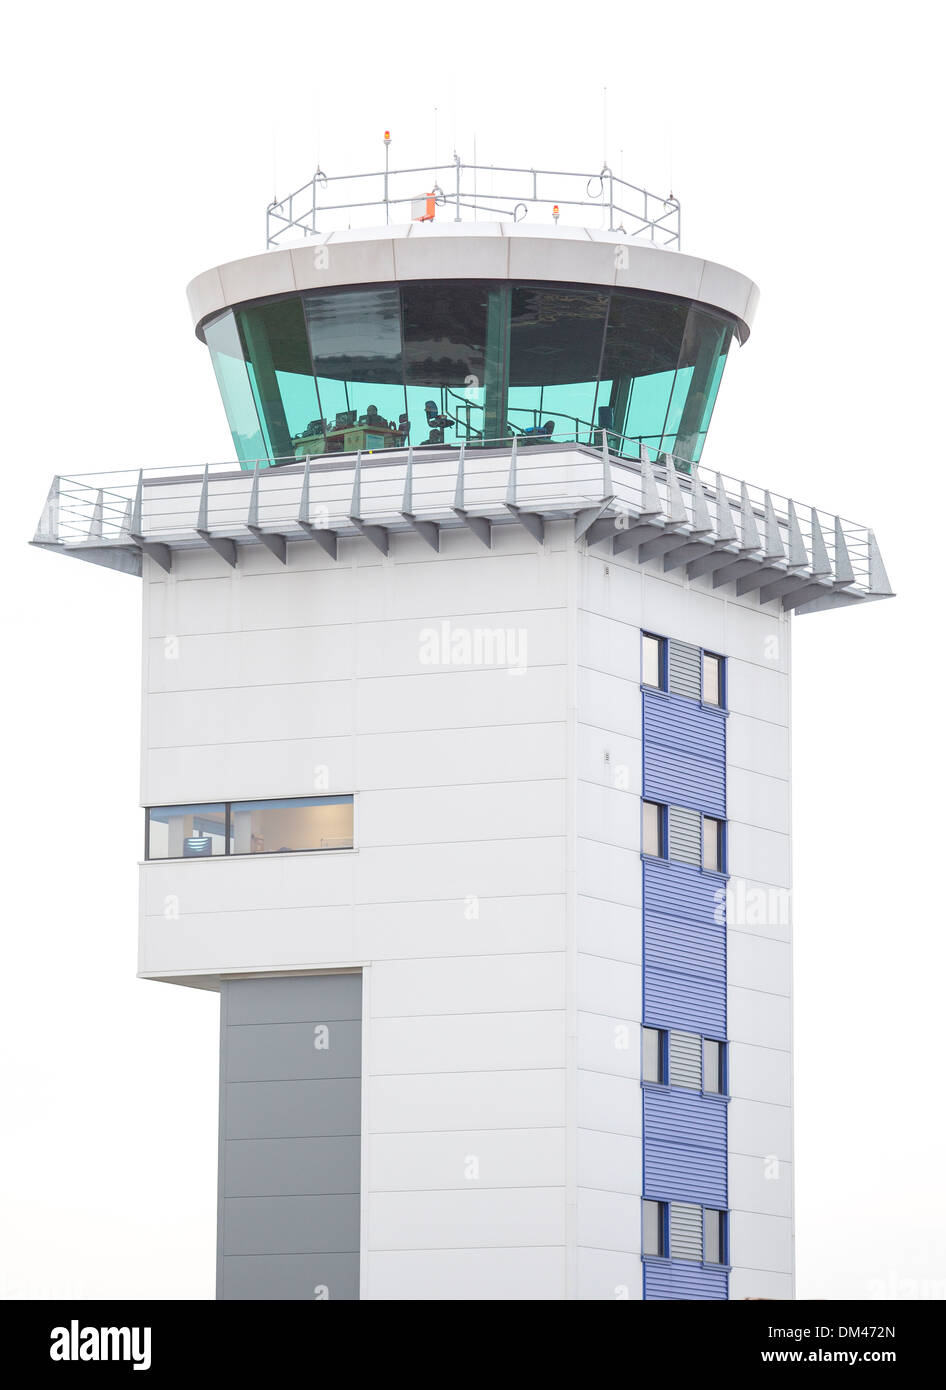 29/11/2013 London Southend airport control tower Stock Photo